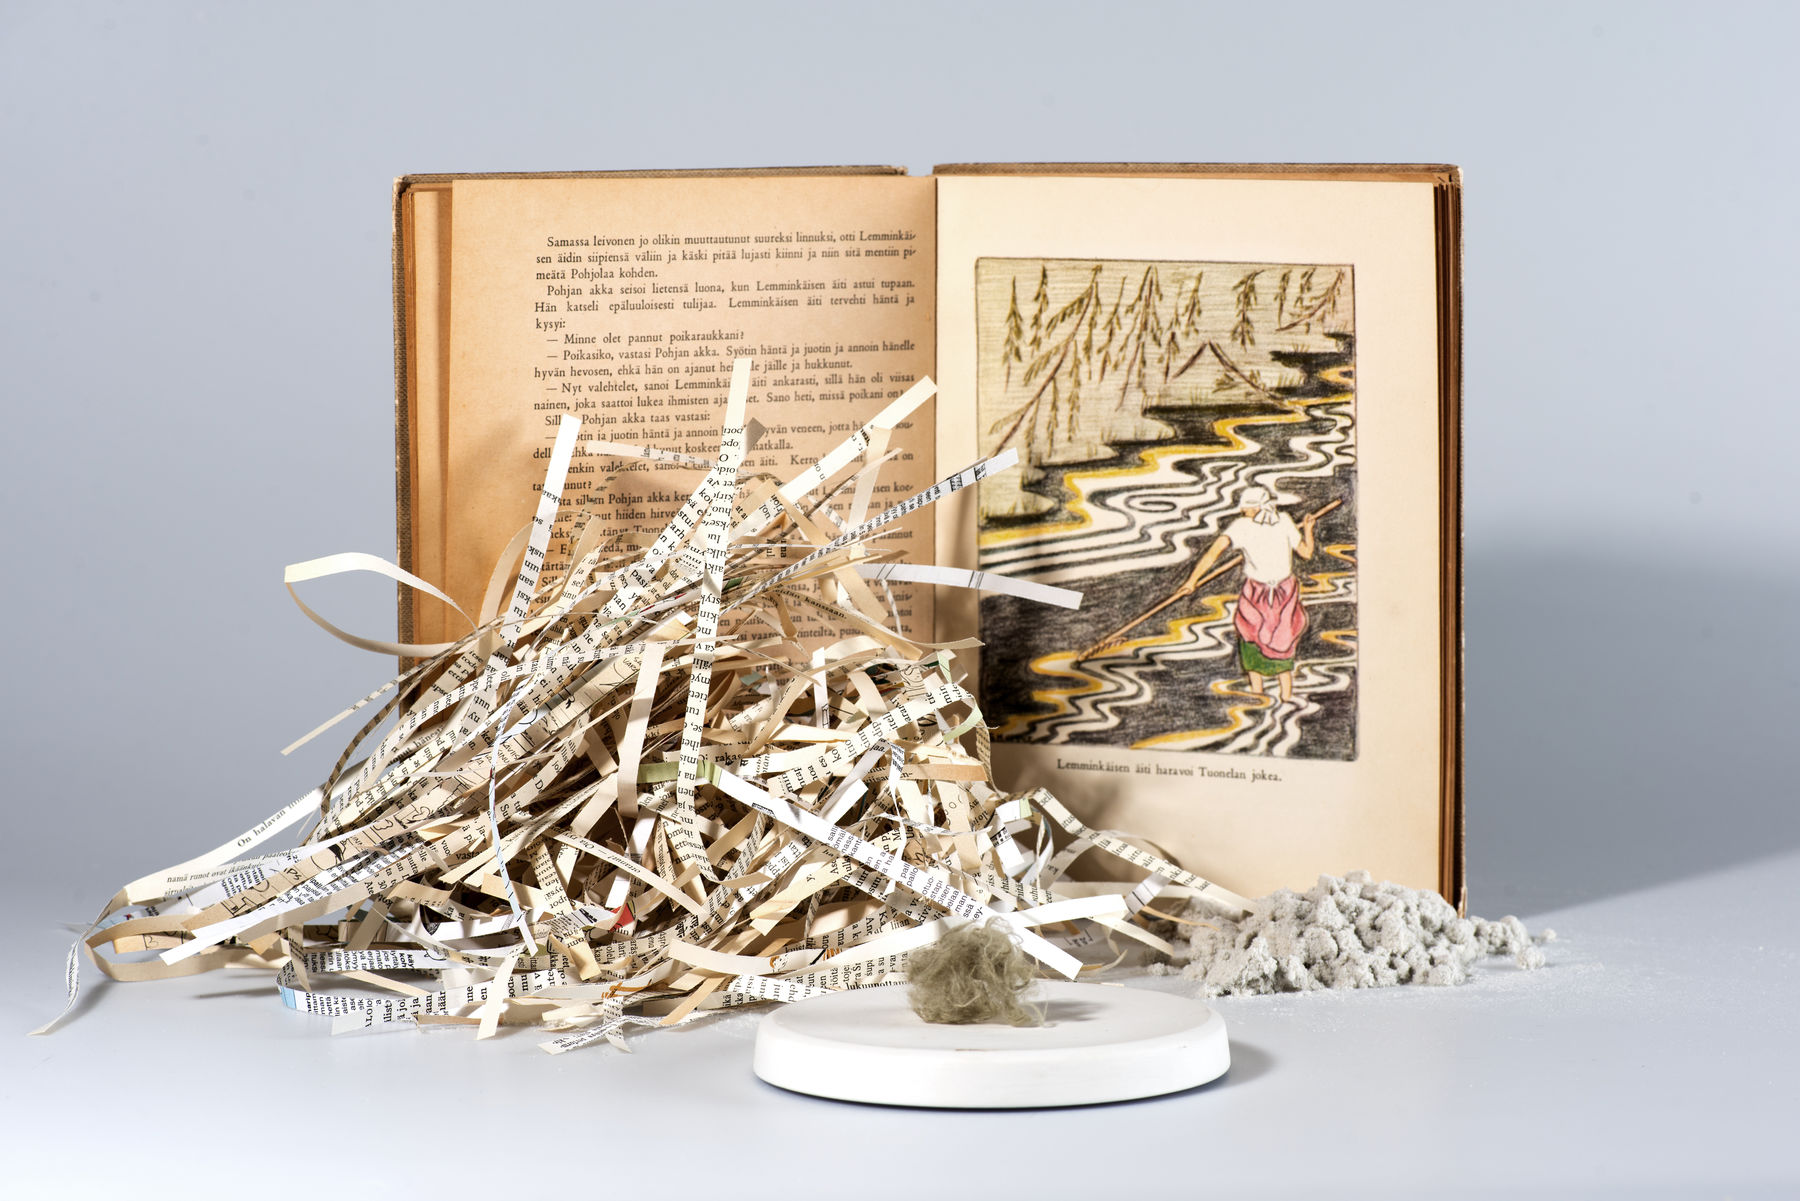 A book and textile fibre made out of books.